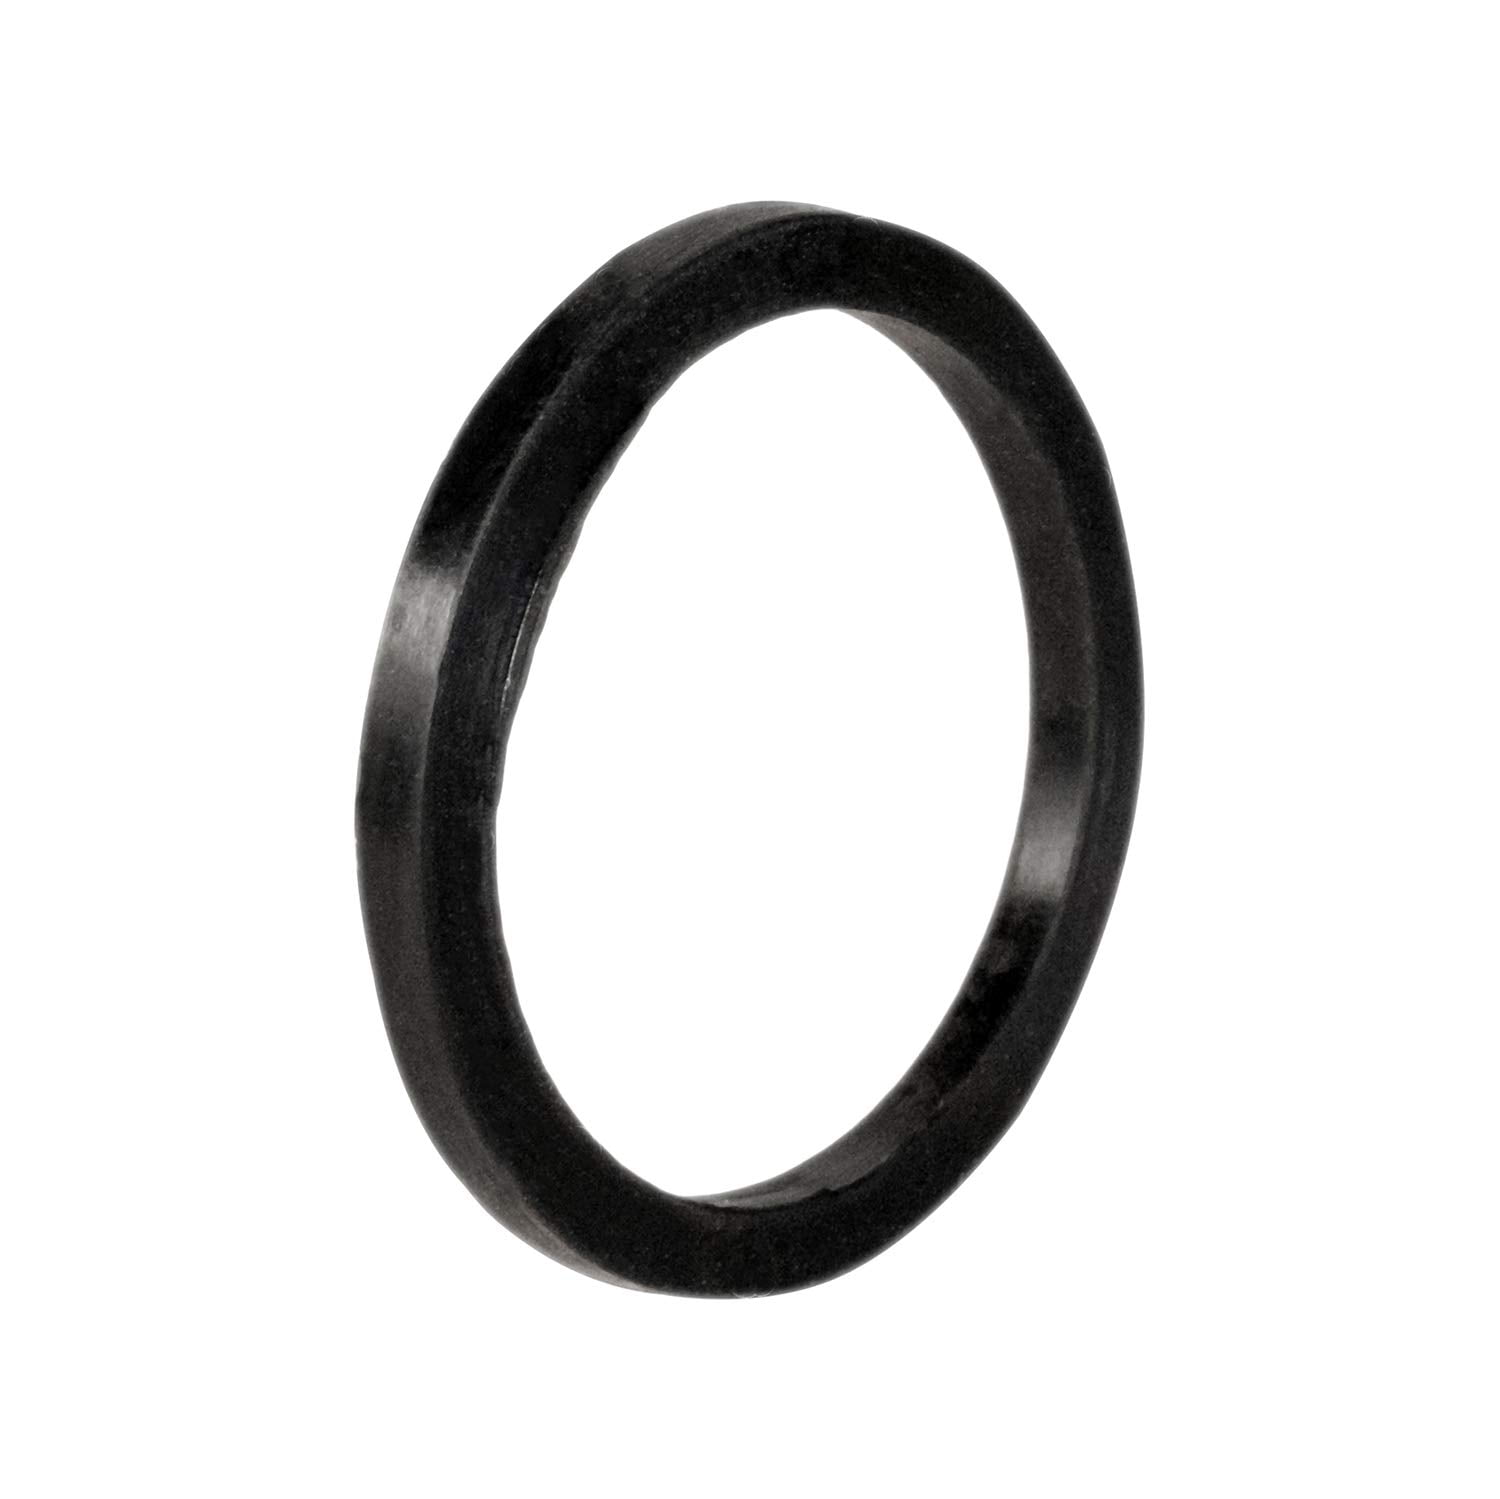 Rubber Washer for Tubular Drain Applications x 1-1/4 in 1-1/2 in 